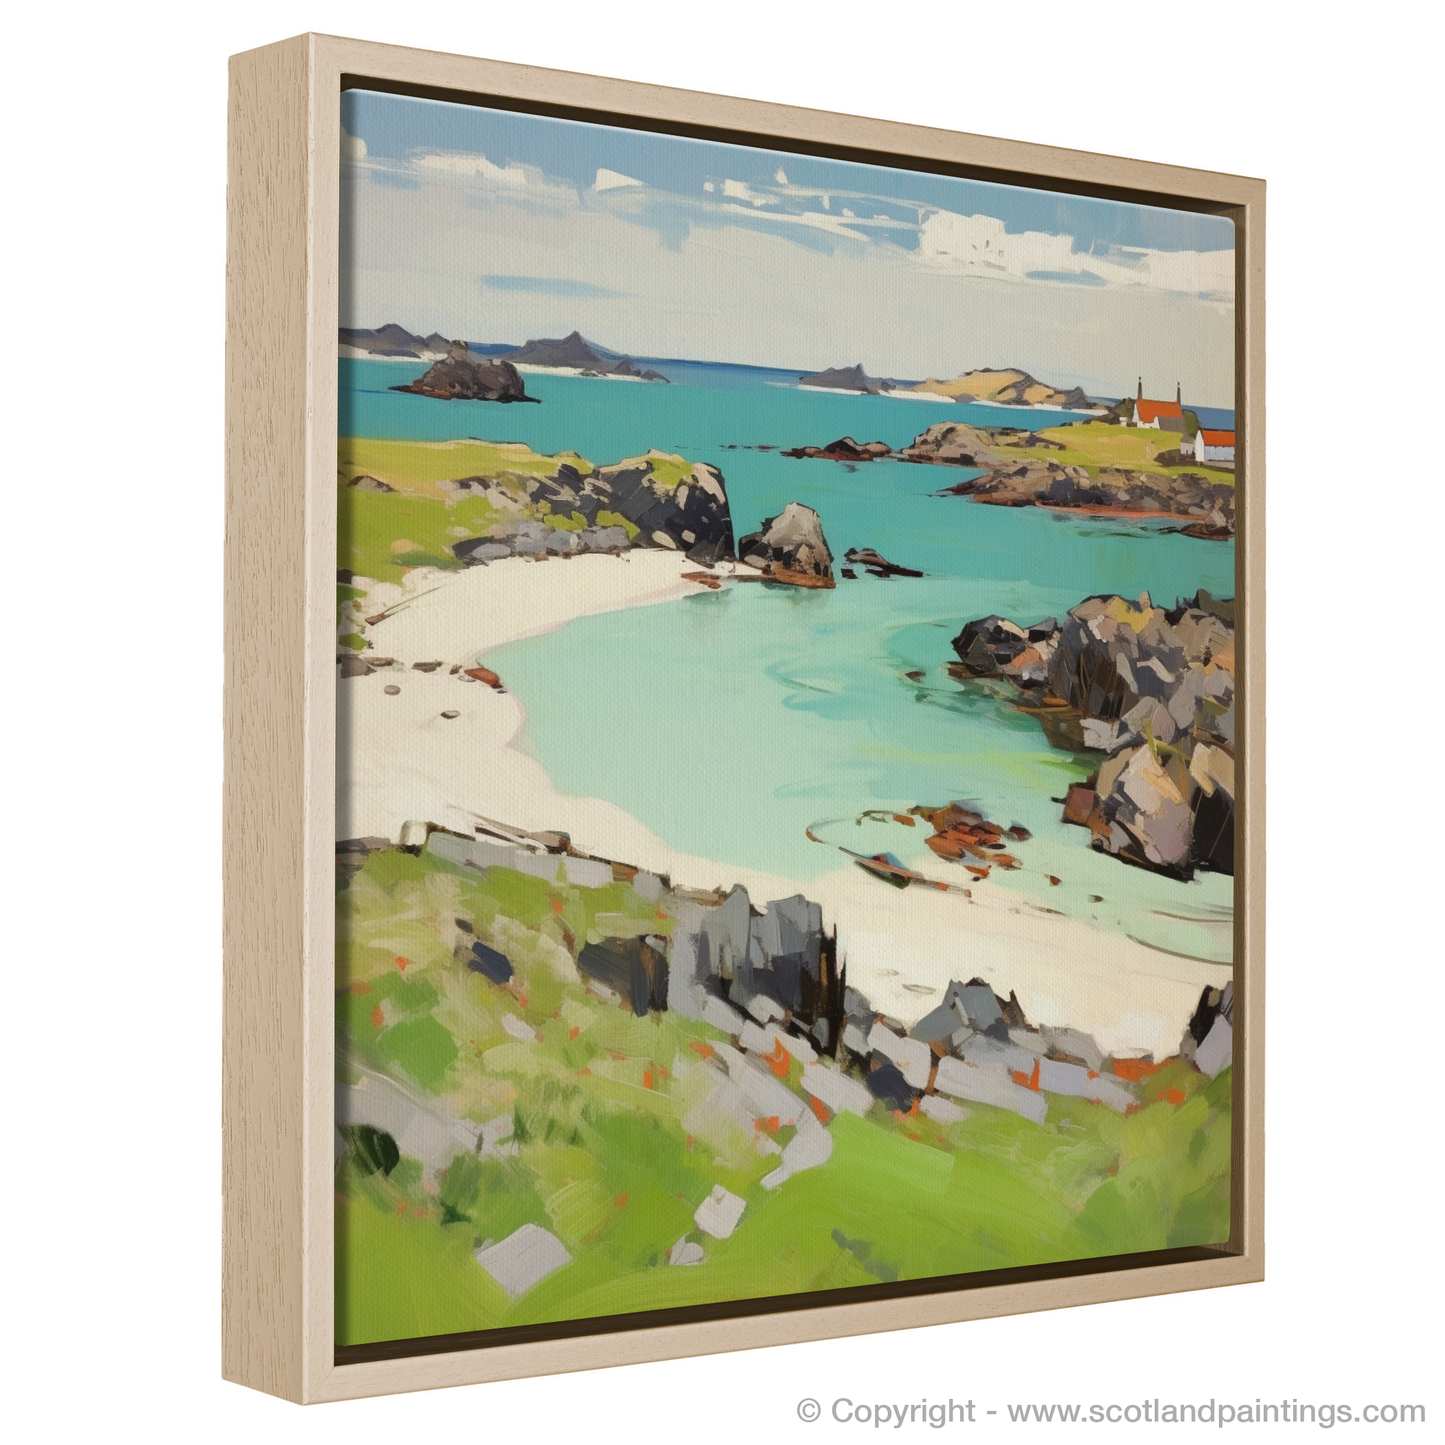 Painting and Art Print of Isle of Iona, Inner Hebrides entitled "Isle of Iona: Abstract Expressions of Scottish Serenity".